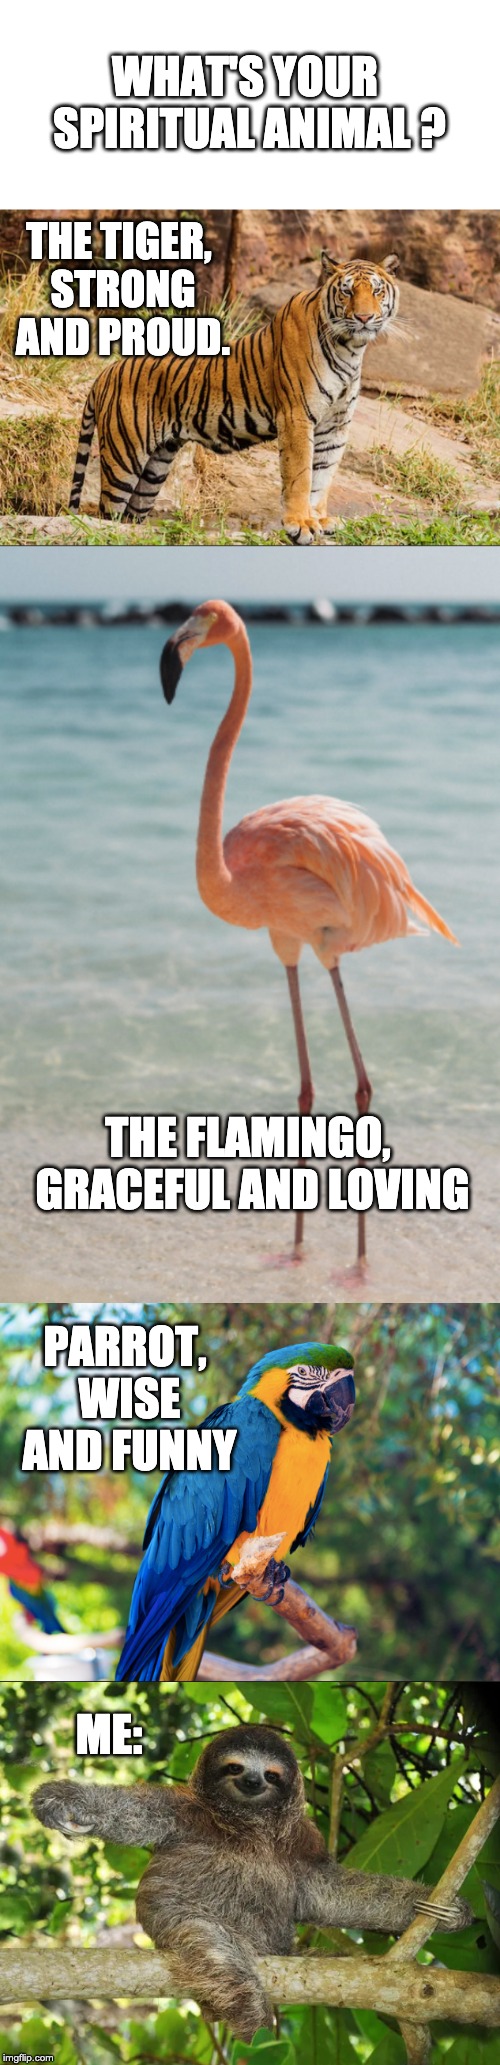 WHAT'S YOUR SPIRITUAL ANIMAL ? THE TIGER, STRONG AND PROUD. THE FLAMINGO, GRACEFUL AND LOVING; PARROT, WISE AND FUNNY; ME: | image tagged in animals | made w/ Imgflip meme maker